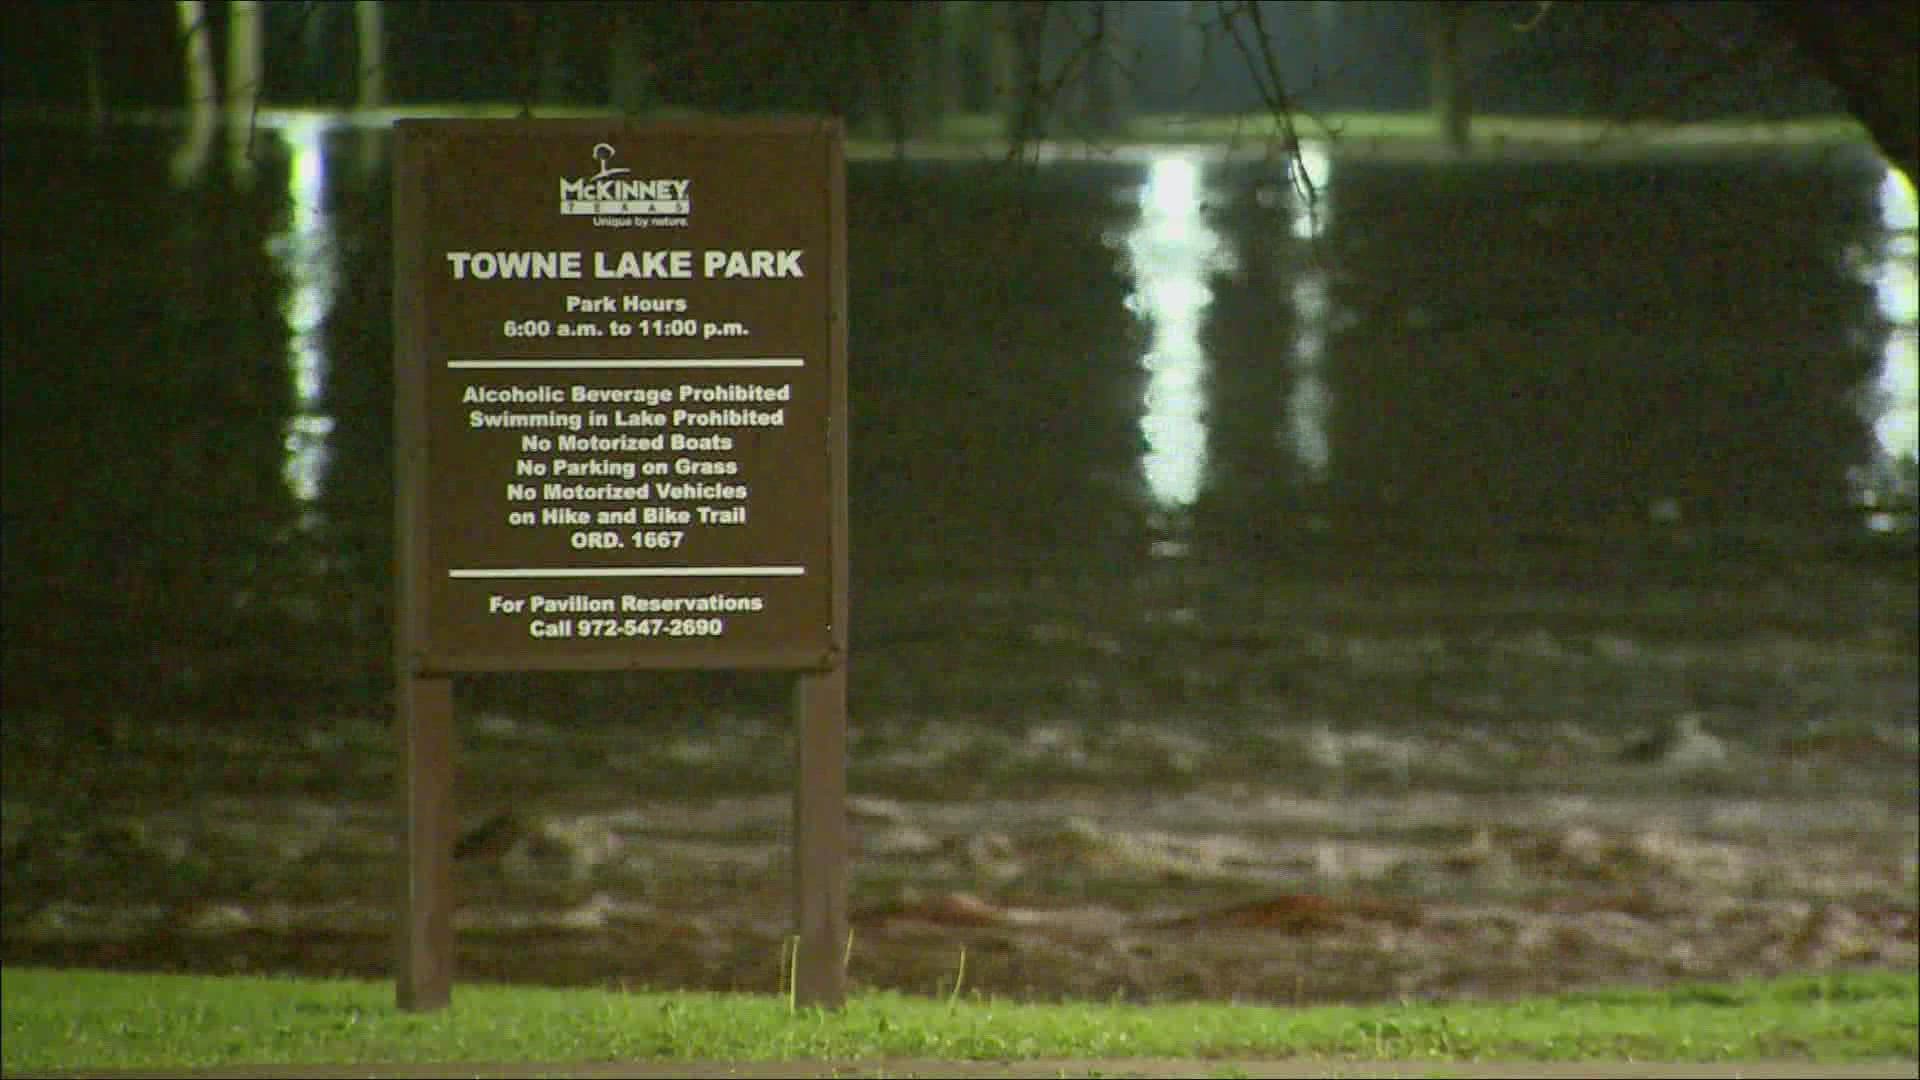 Water had covered the parking lot at Towne Lake Park in McKinney on Monday night.